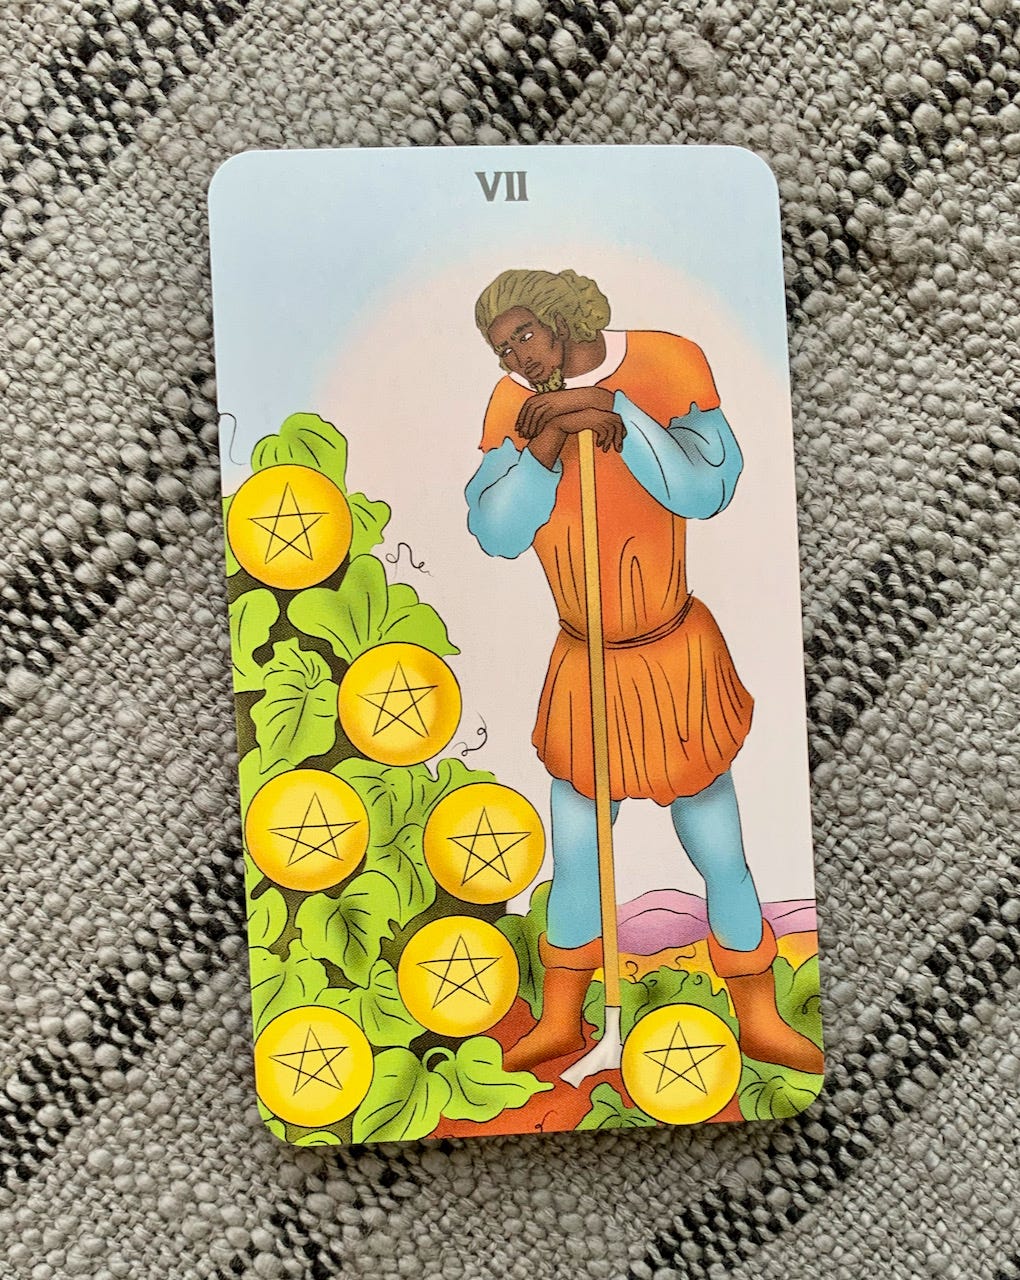 A black man in an orange and blue tunic leans on a hoe and looks at a patch of pumpkins, but the pumpkins are pentacles